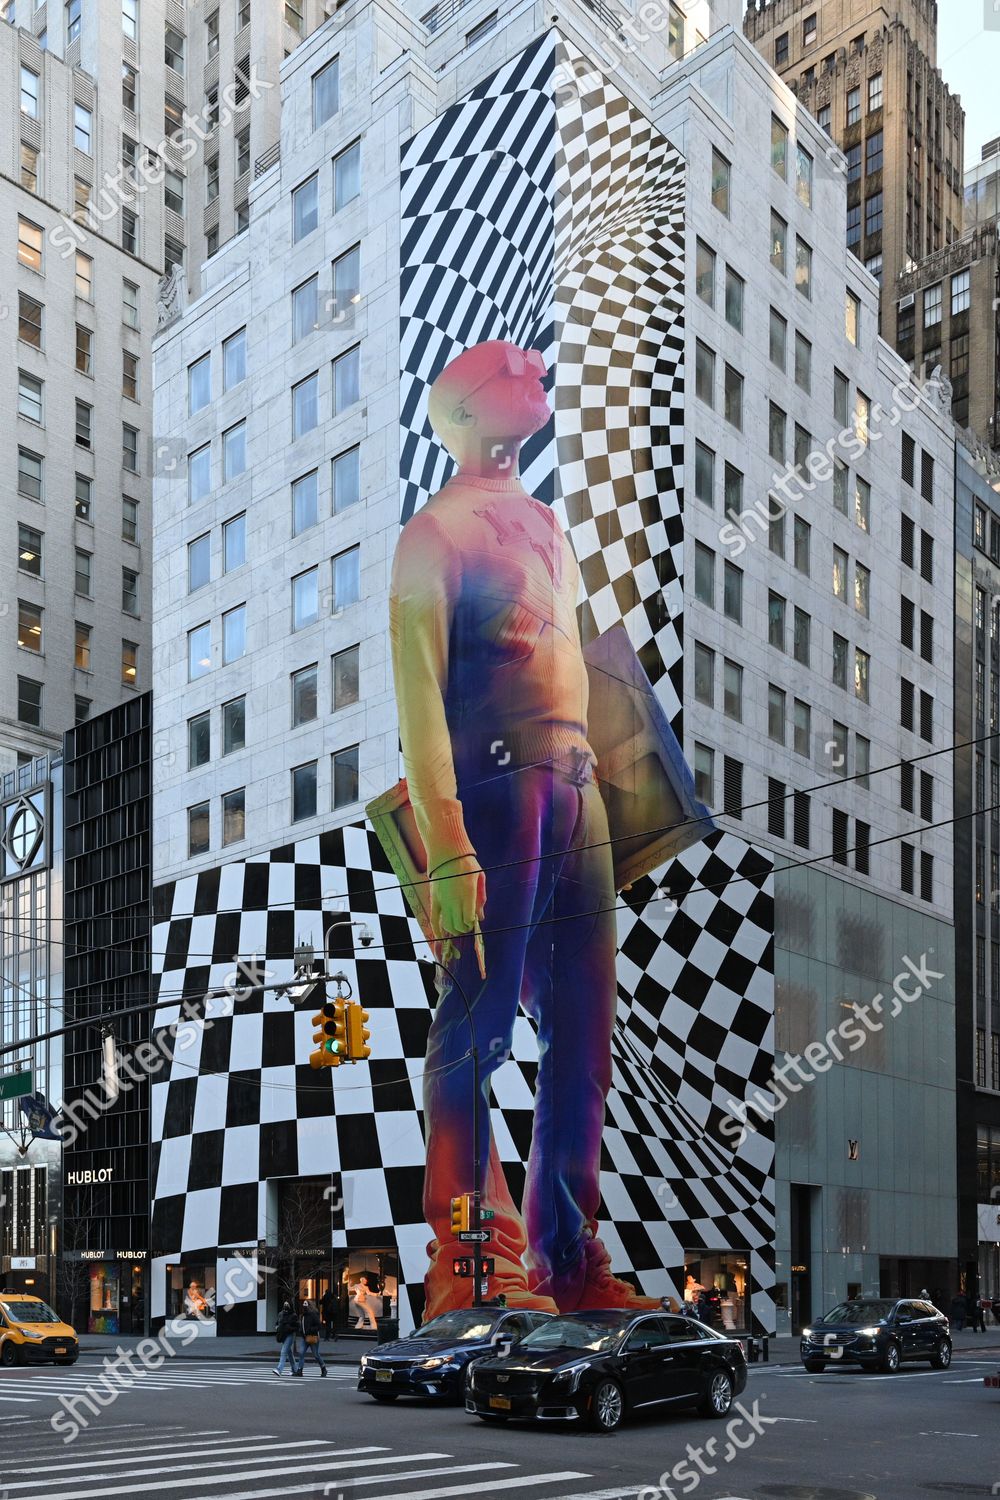 NEW YORK, 1 East 57th St (Louis Vuitton), FT